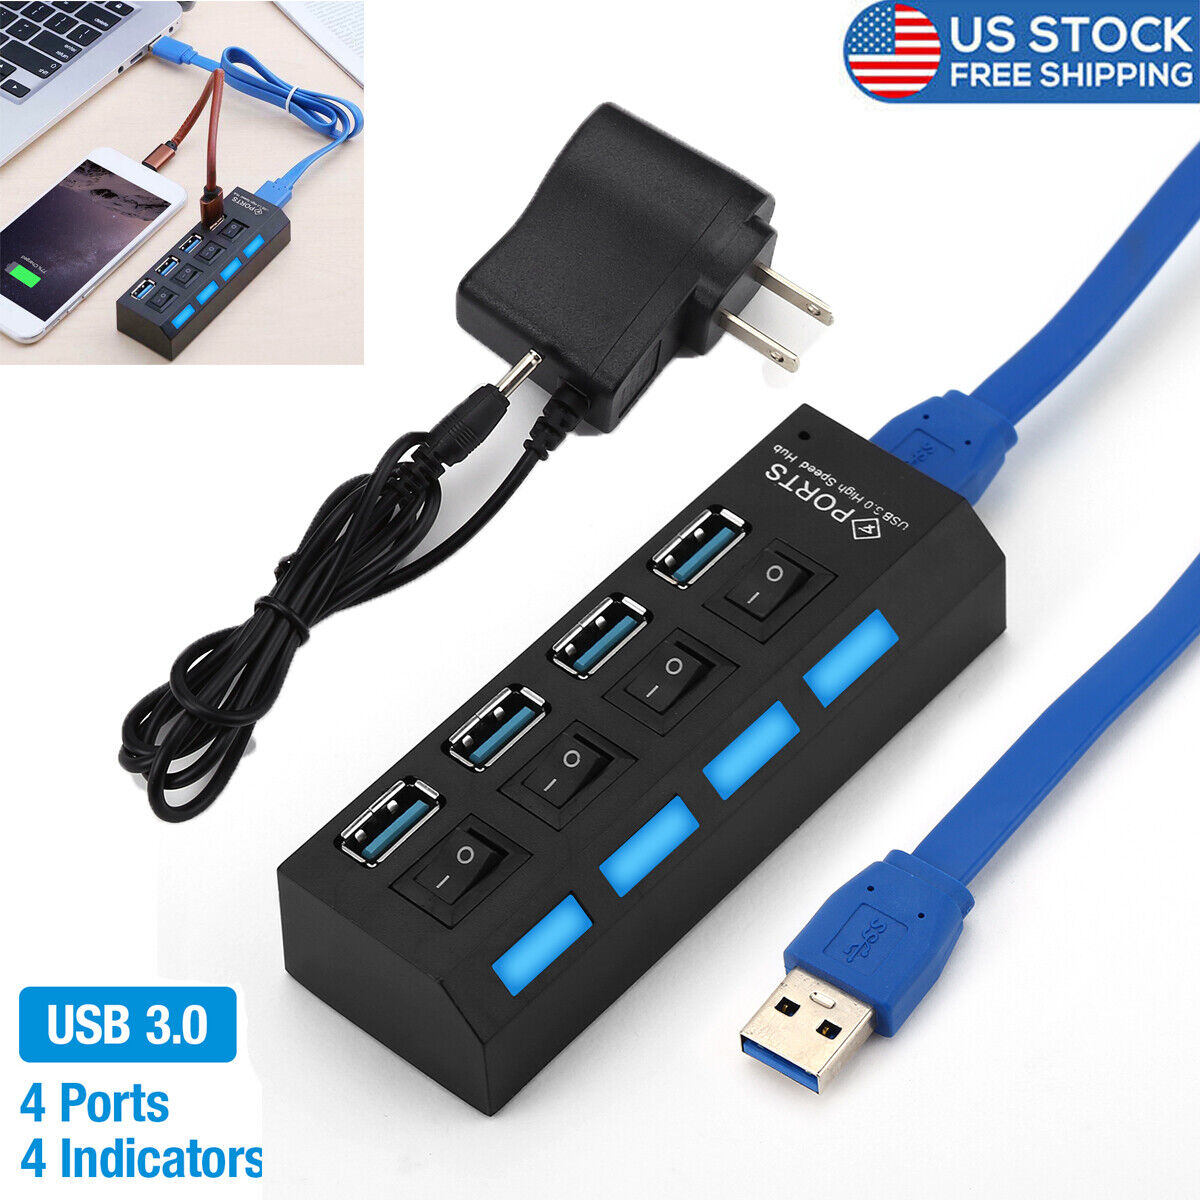 4 Ports Splitter USB 3.0 Hub with Power Adapter On/Off Switch For Laptop PC